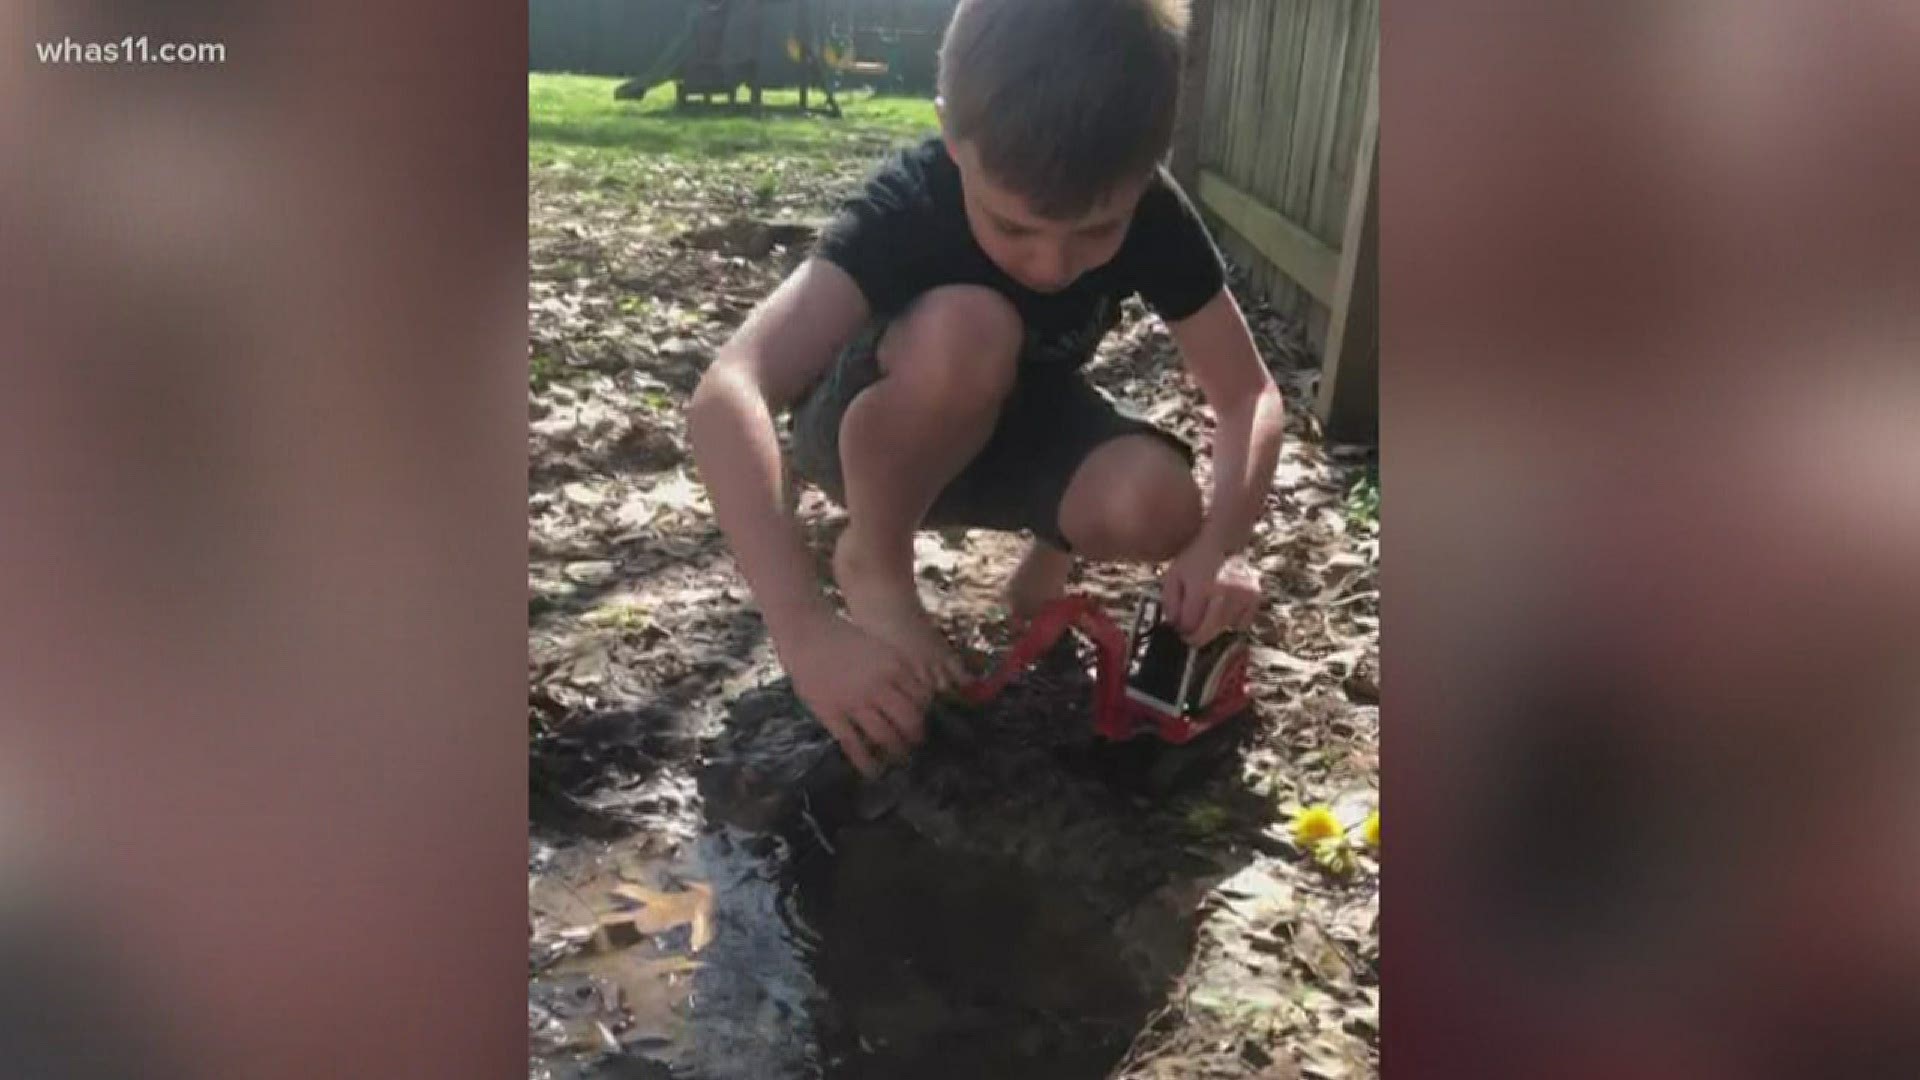 After a Jeffersonville boy broke one of his toys... he picked up the phone to call for help the person who answered wasn't whom you'd expect.